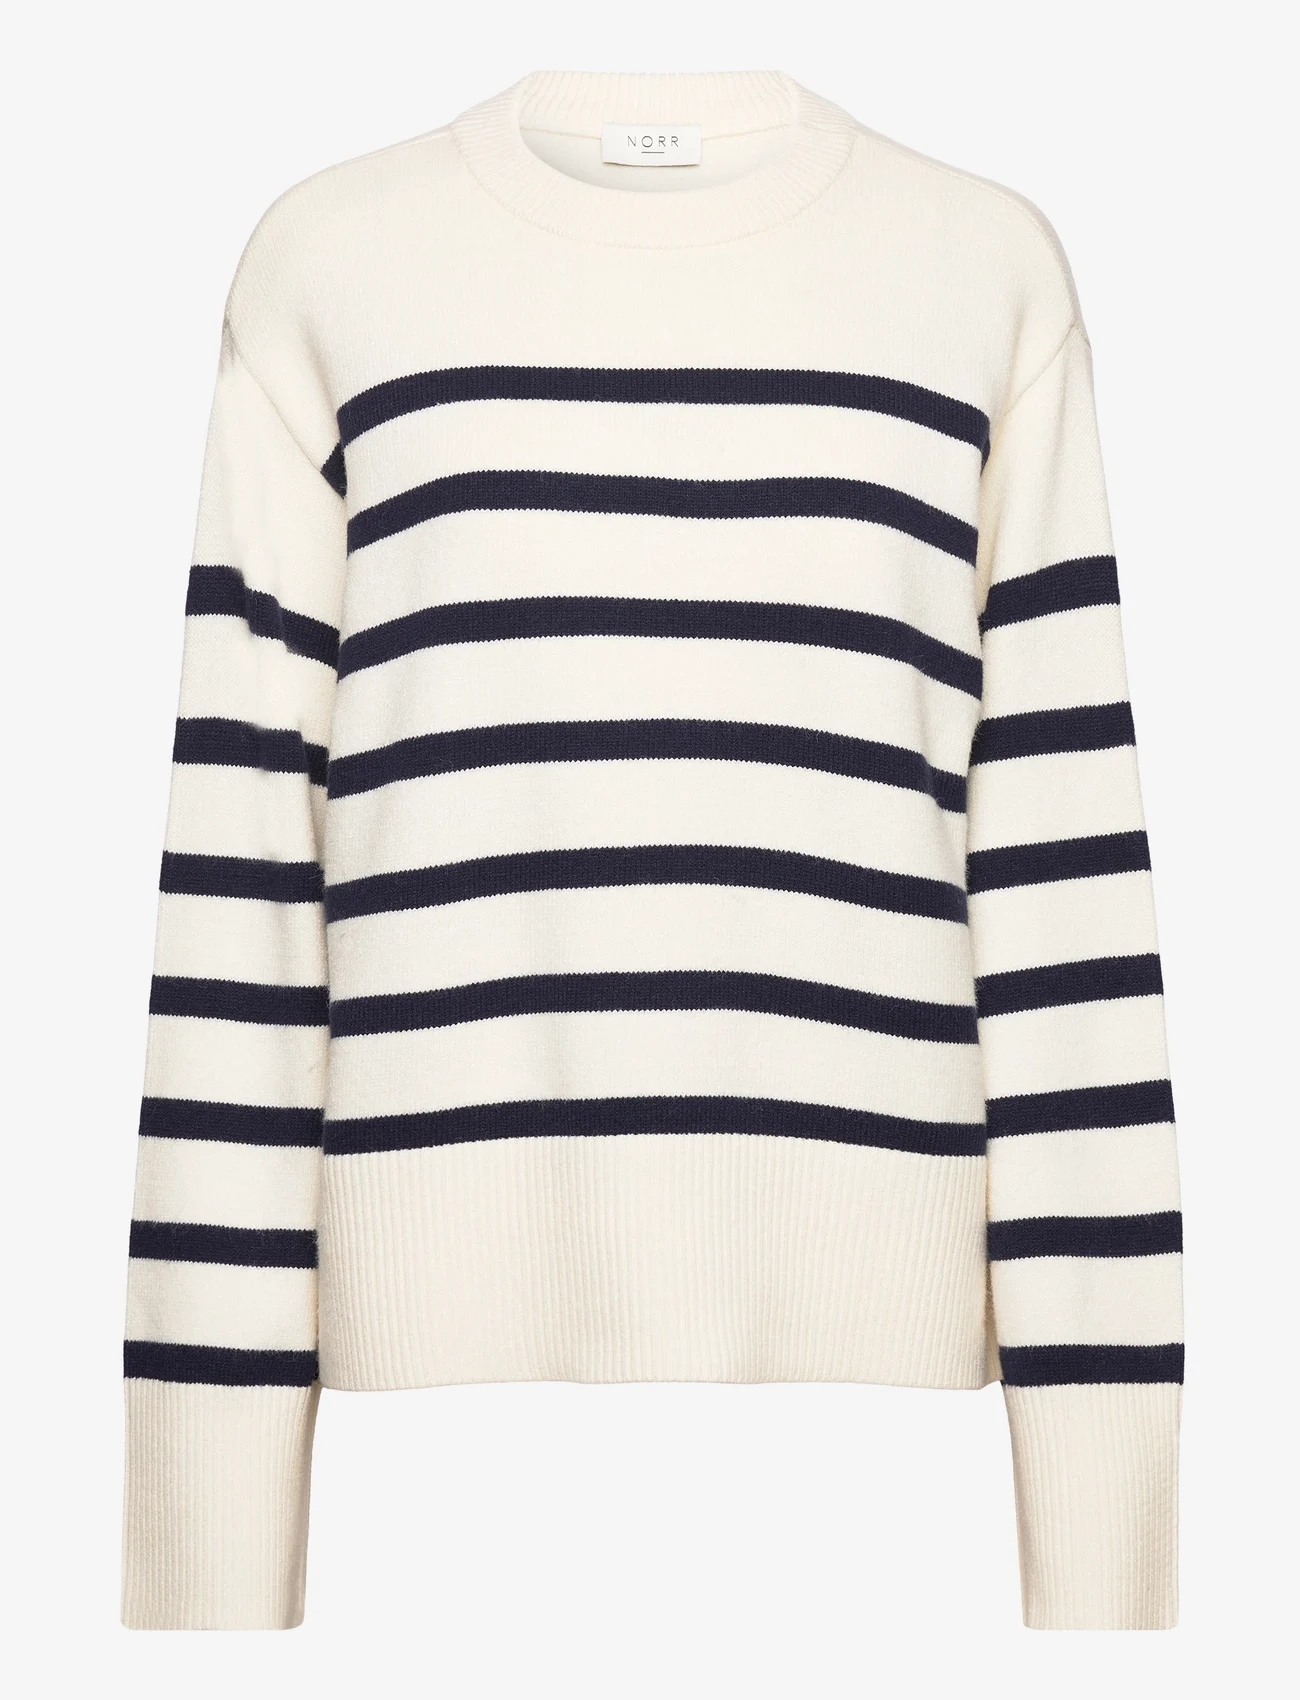 NORR - Lindsay new knit stripe top - jumpers - off white comb - 0